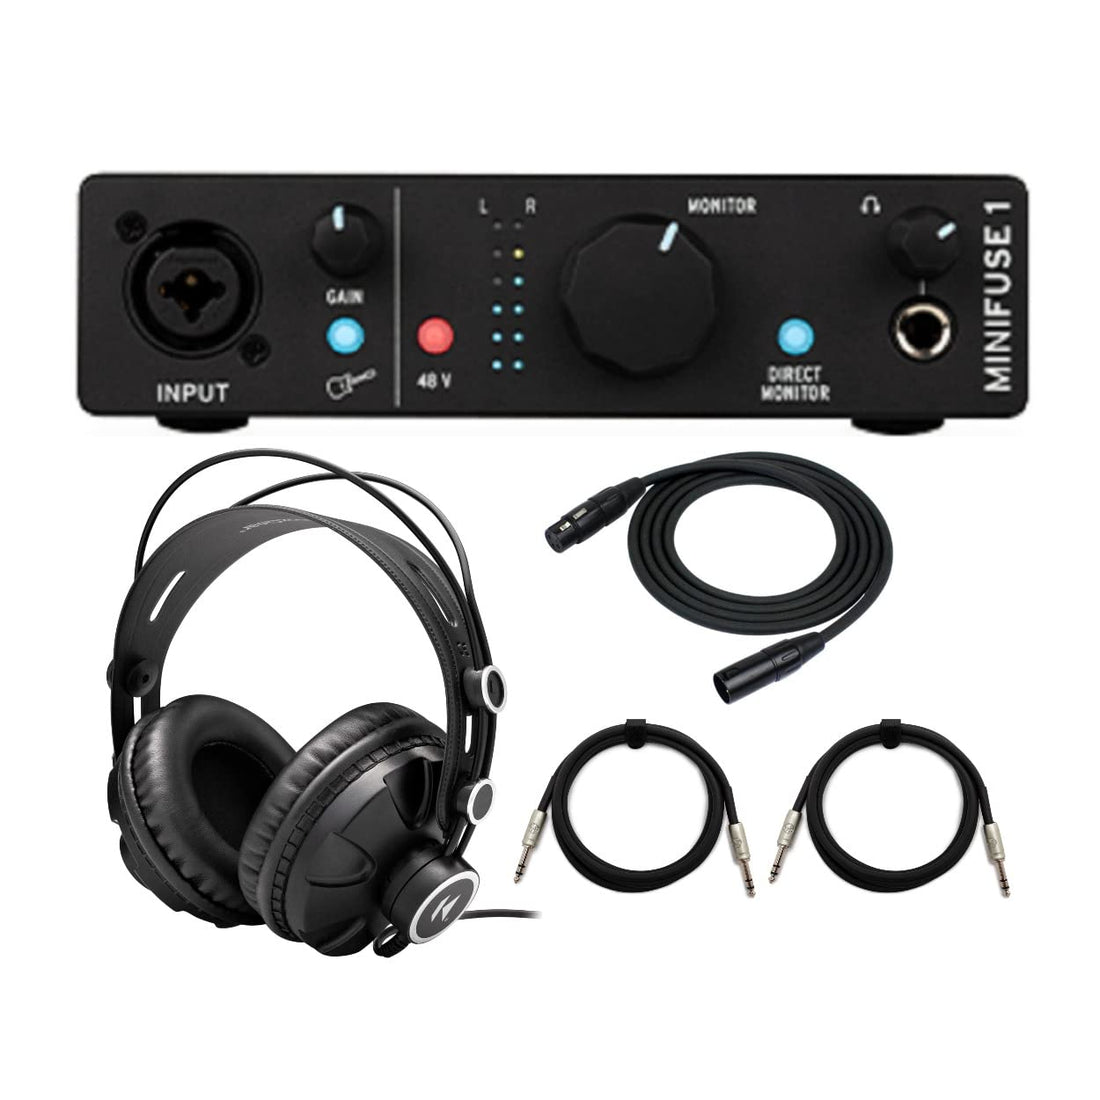 Arturia MiniFuse 1 USB-C Audio Interface (Black) Bundle with Studio Headphones, XLR Cable and TRS Cables (2-Pack) (5 Items)